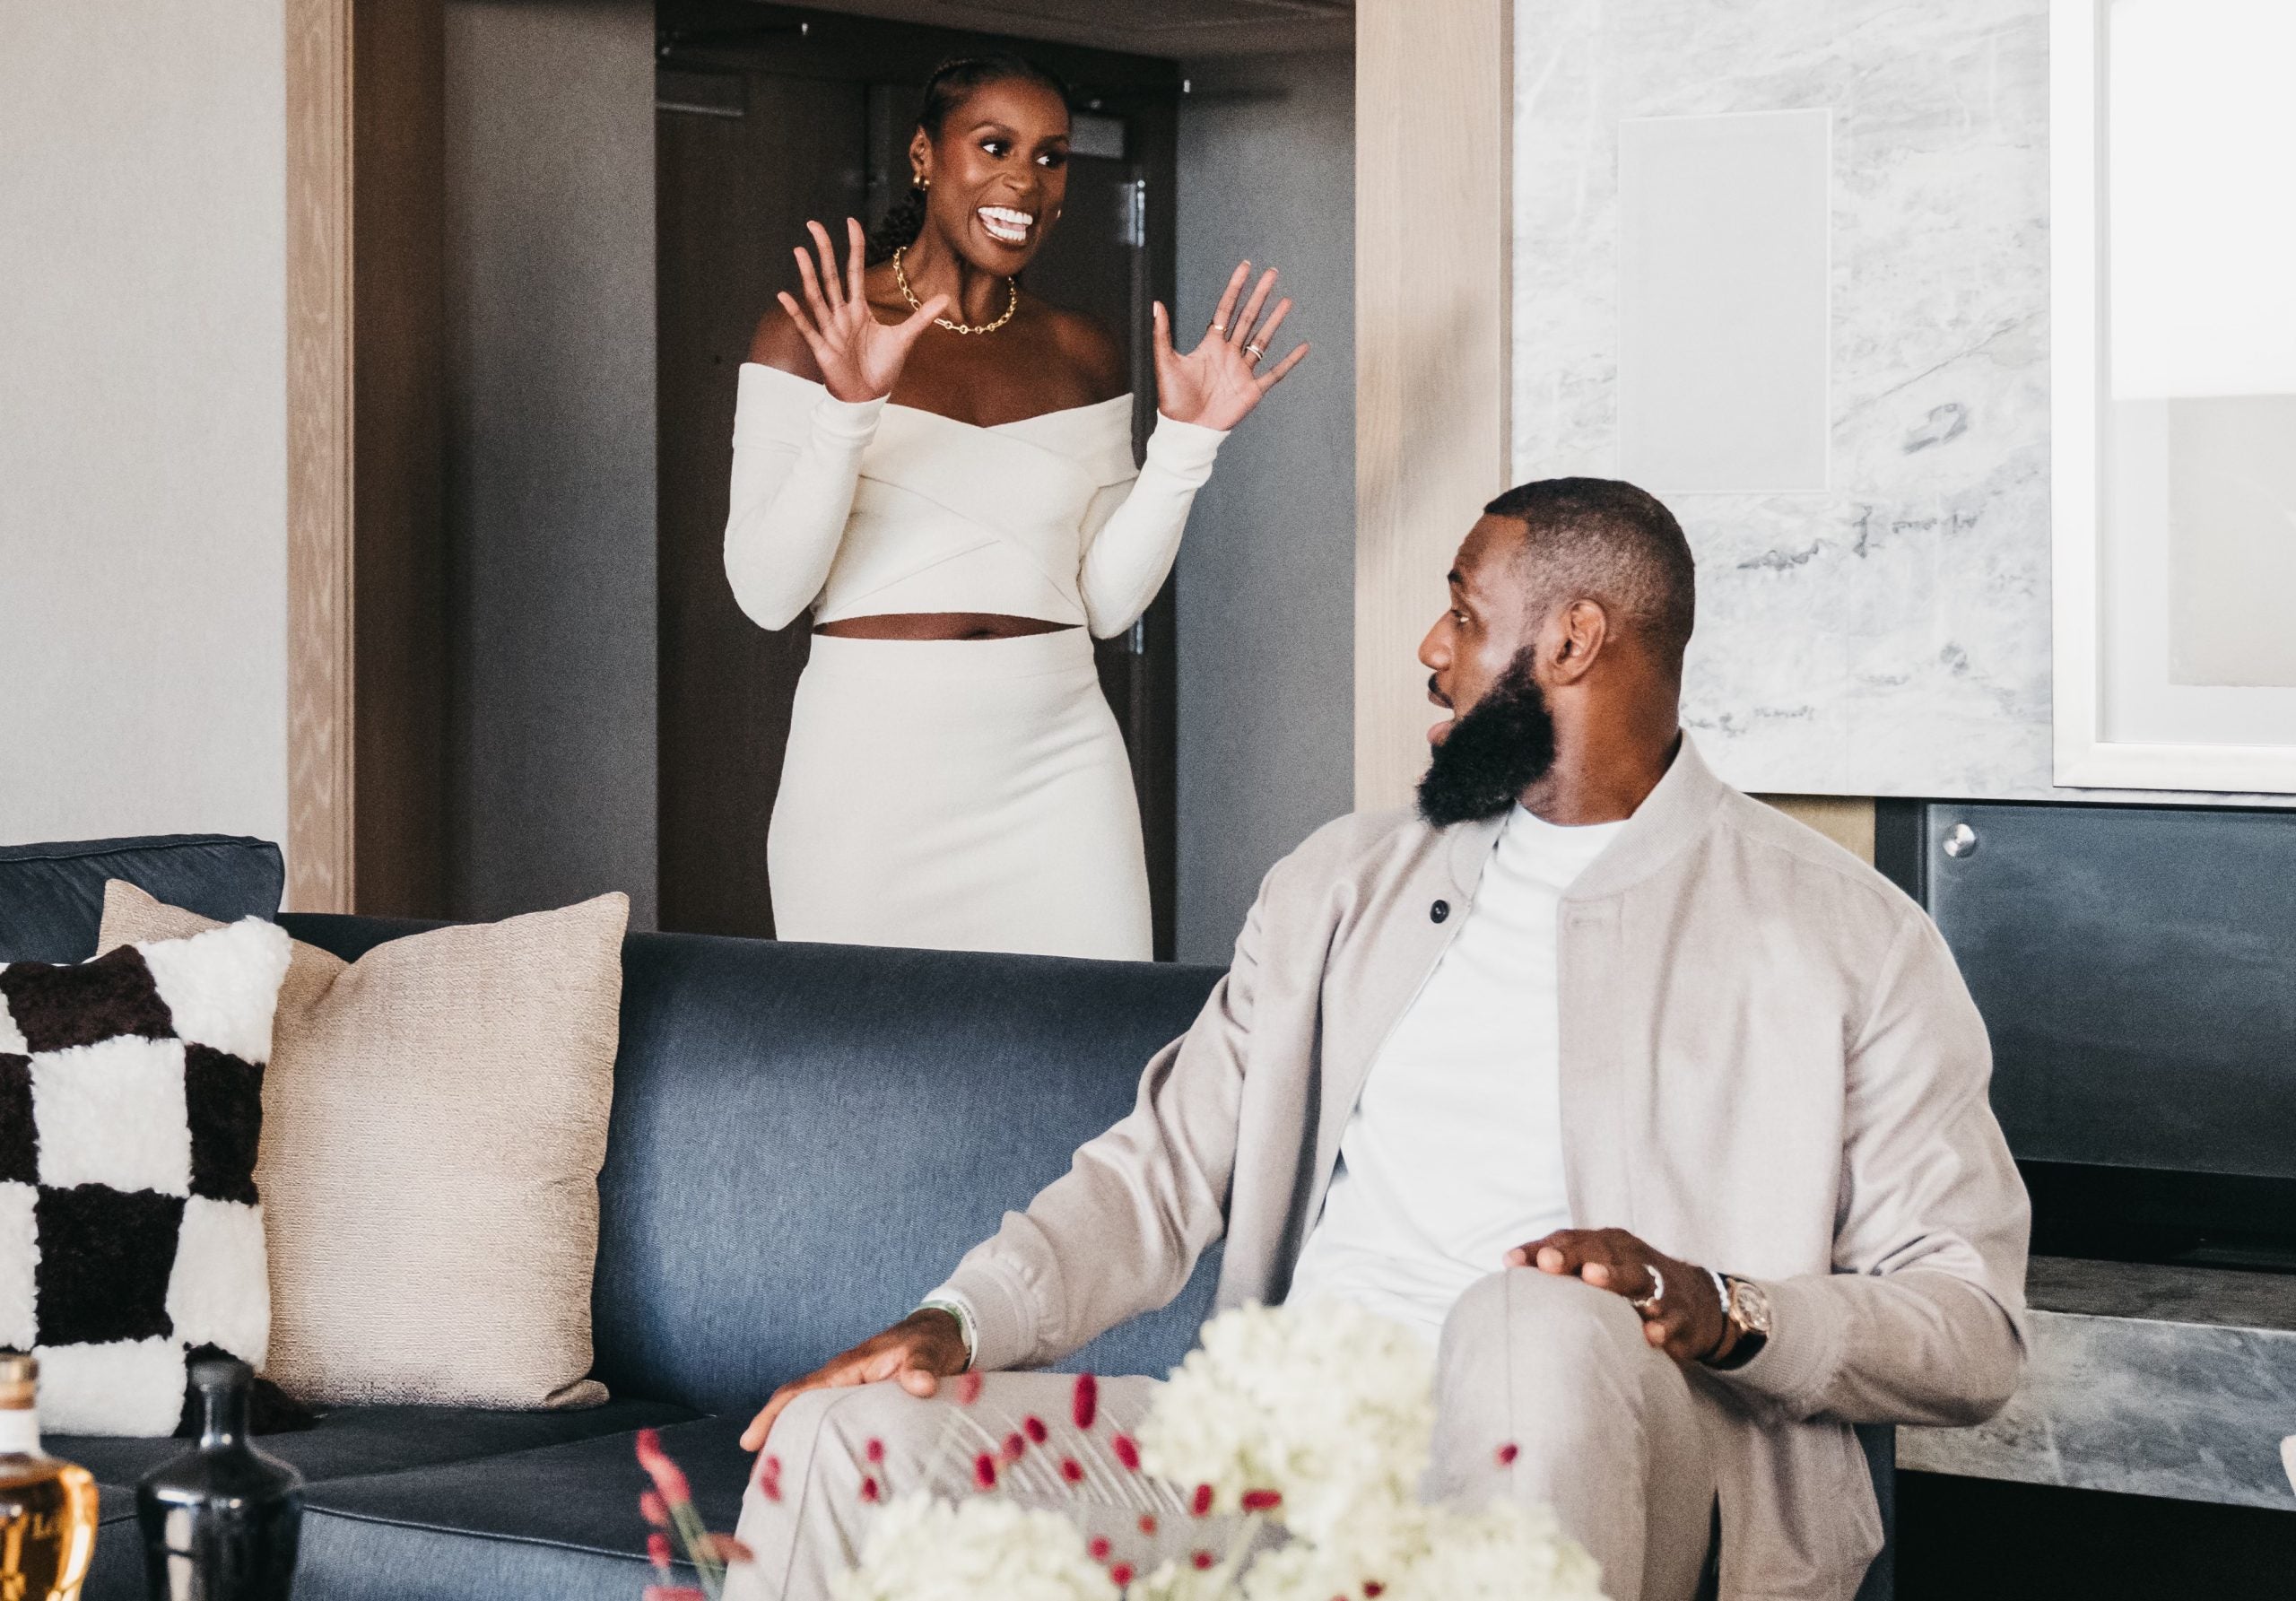 EXCLUSIVE First Look: Issa Rae Is “Best In Class” Alongside Savannah James, Rich Paul, And More In New Lobos 1707 Campaign